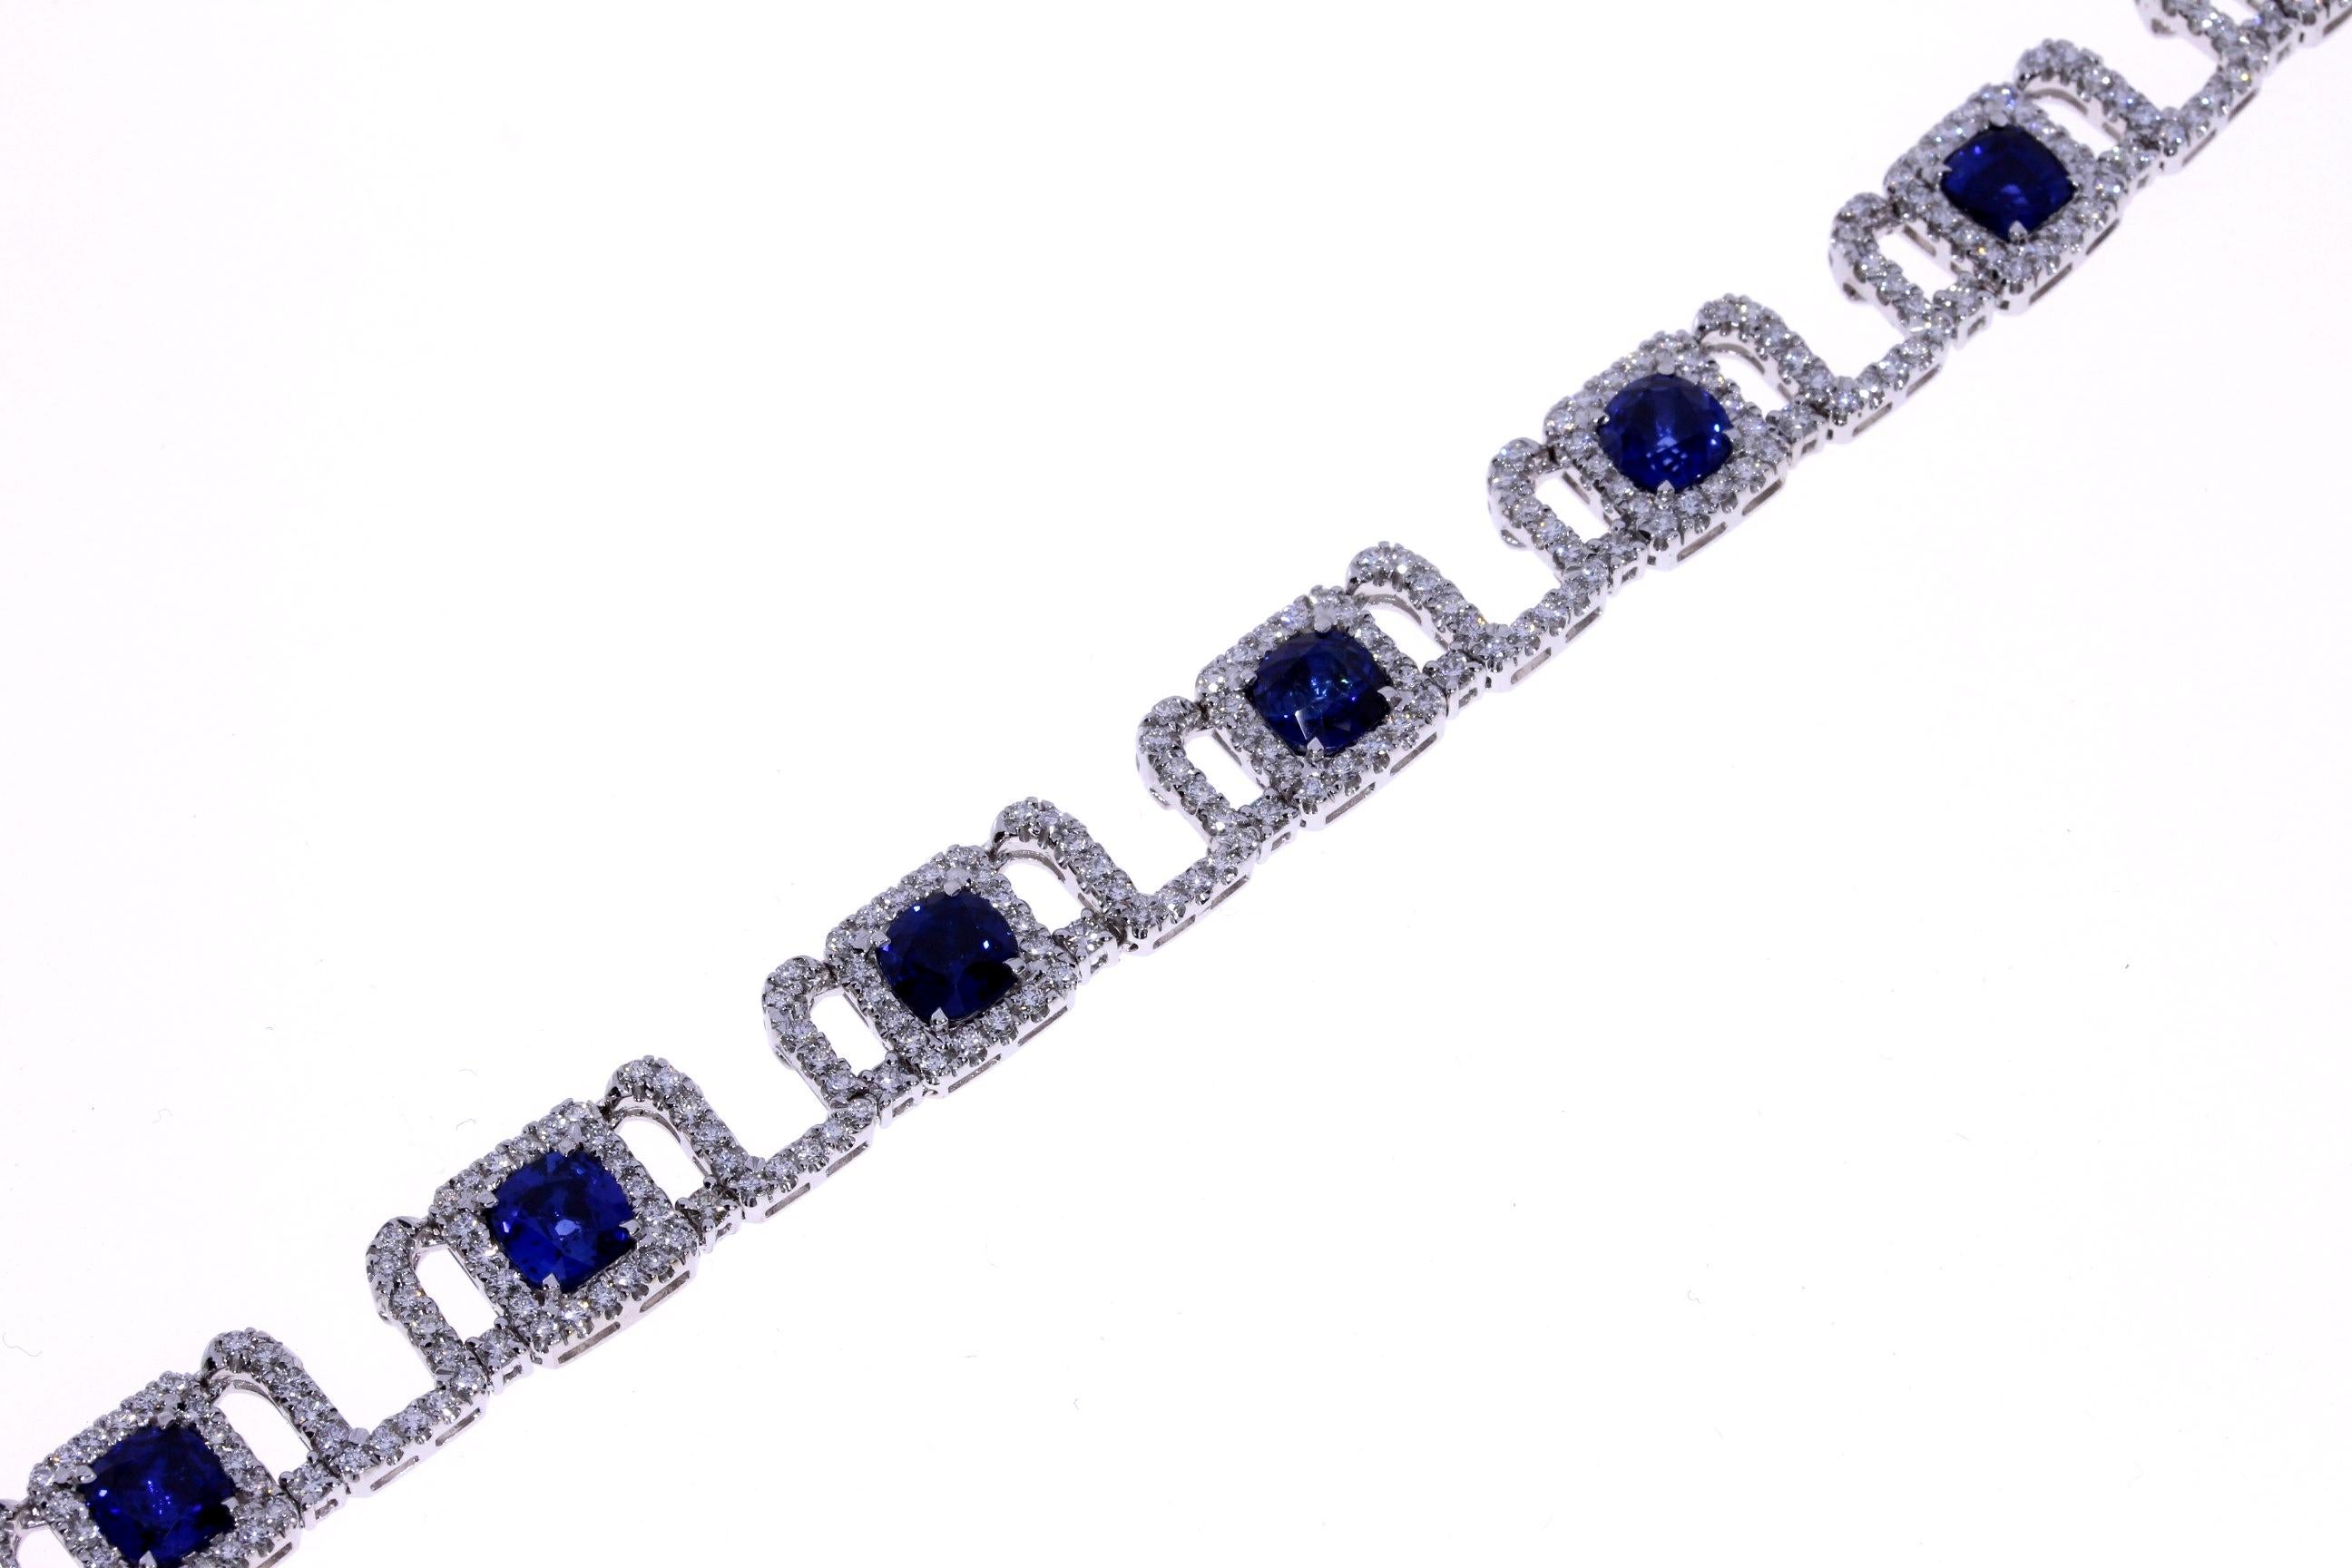 Handmade
18K White Gold
7.94ct Total Diamond
19.67ct Total Sapphire
Diamonds are F-G Color, VS2-SI1
Sapphires are Royal Blue Ceylon Heated
Signature Ounce Collection Design 

Designed, Handpicked, & Manufactured From Scratch In Los Angeles Using